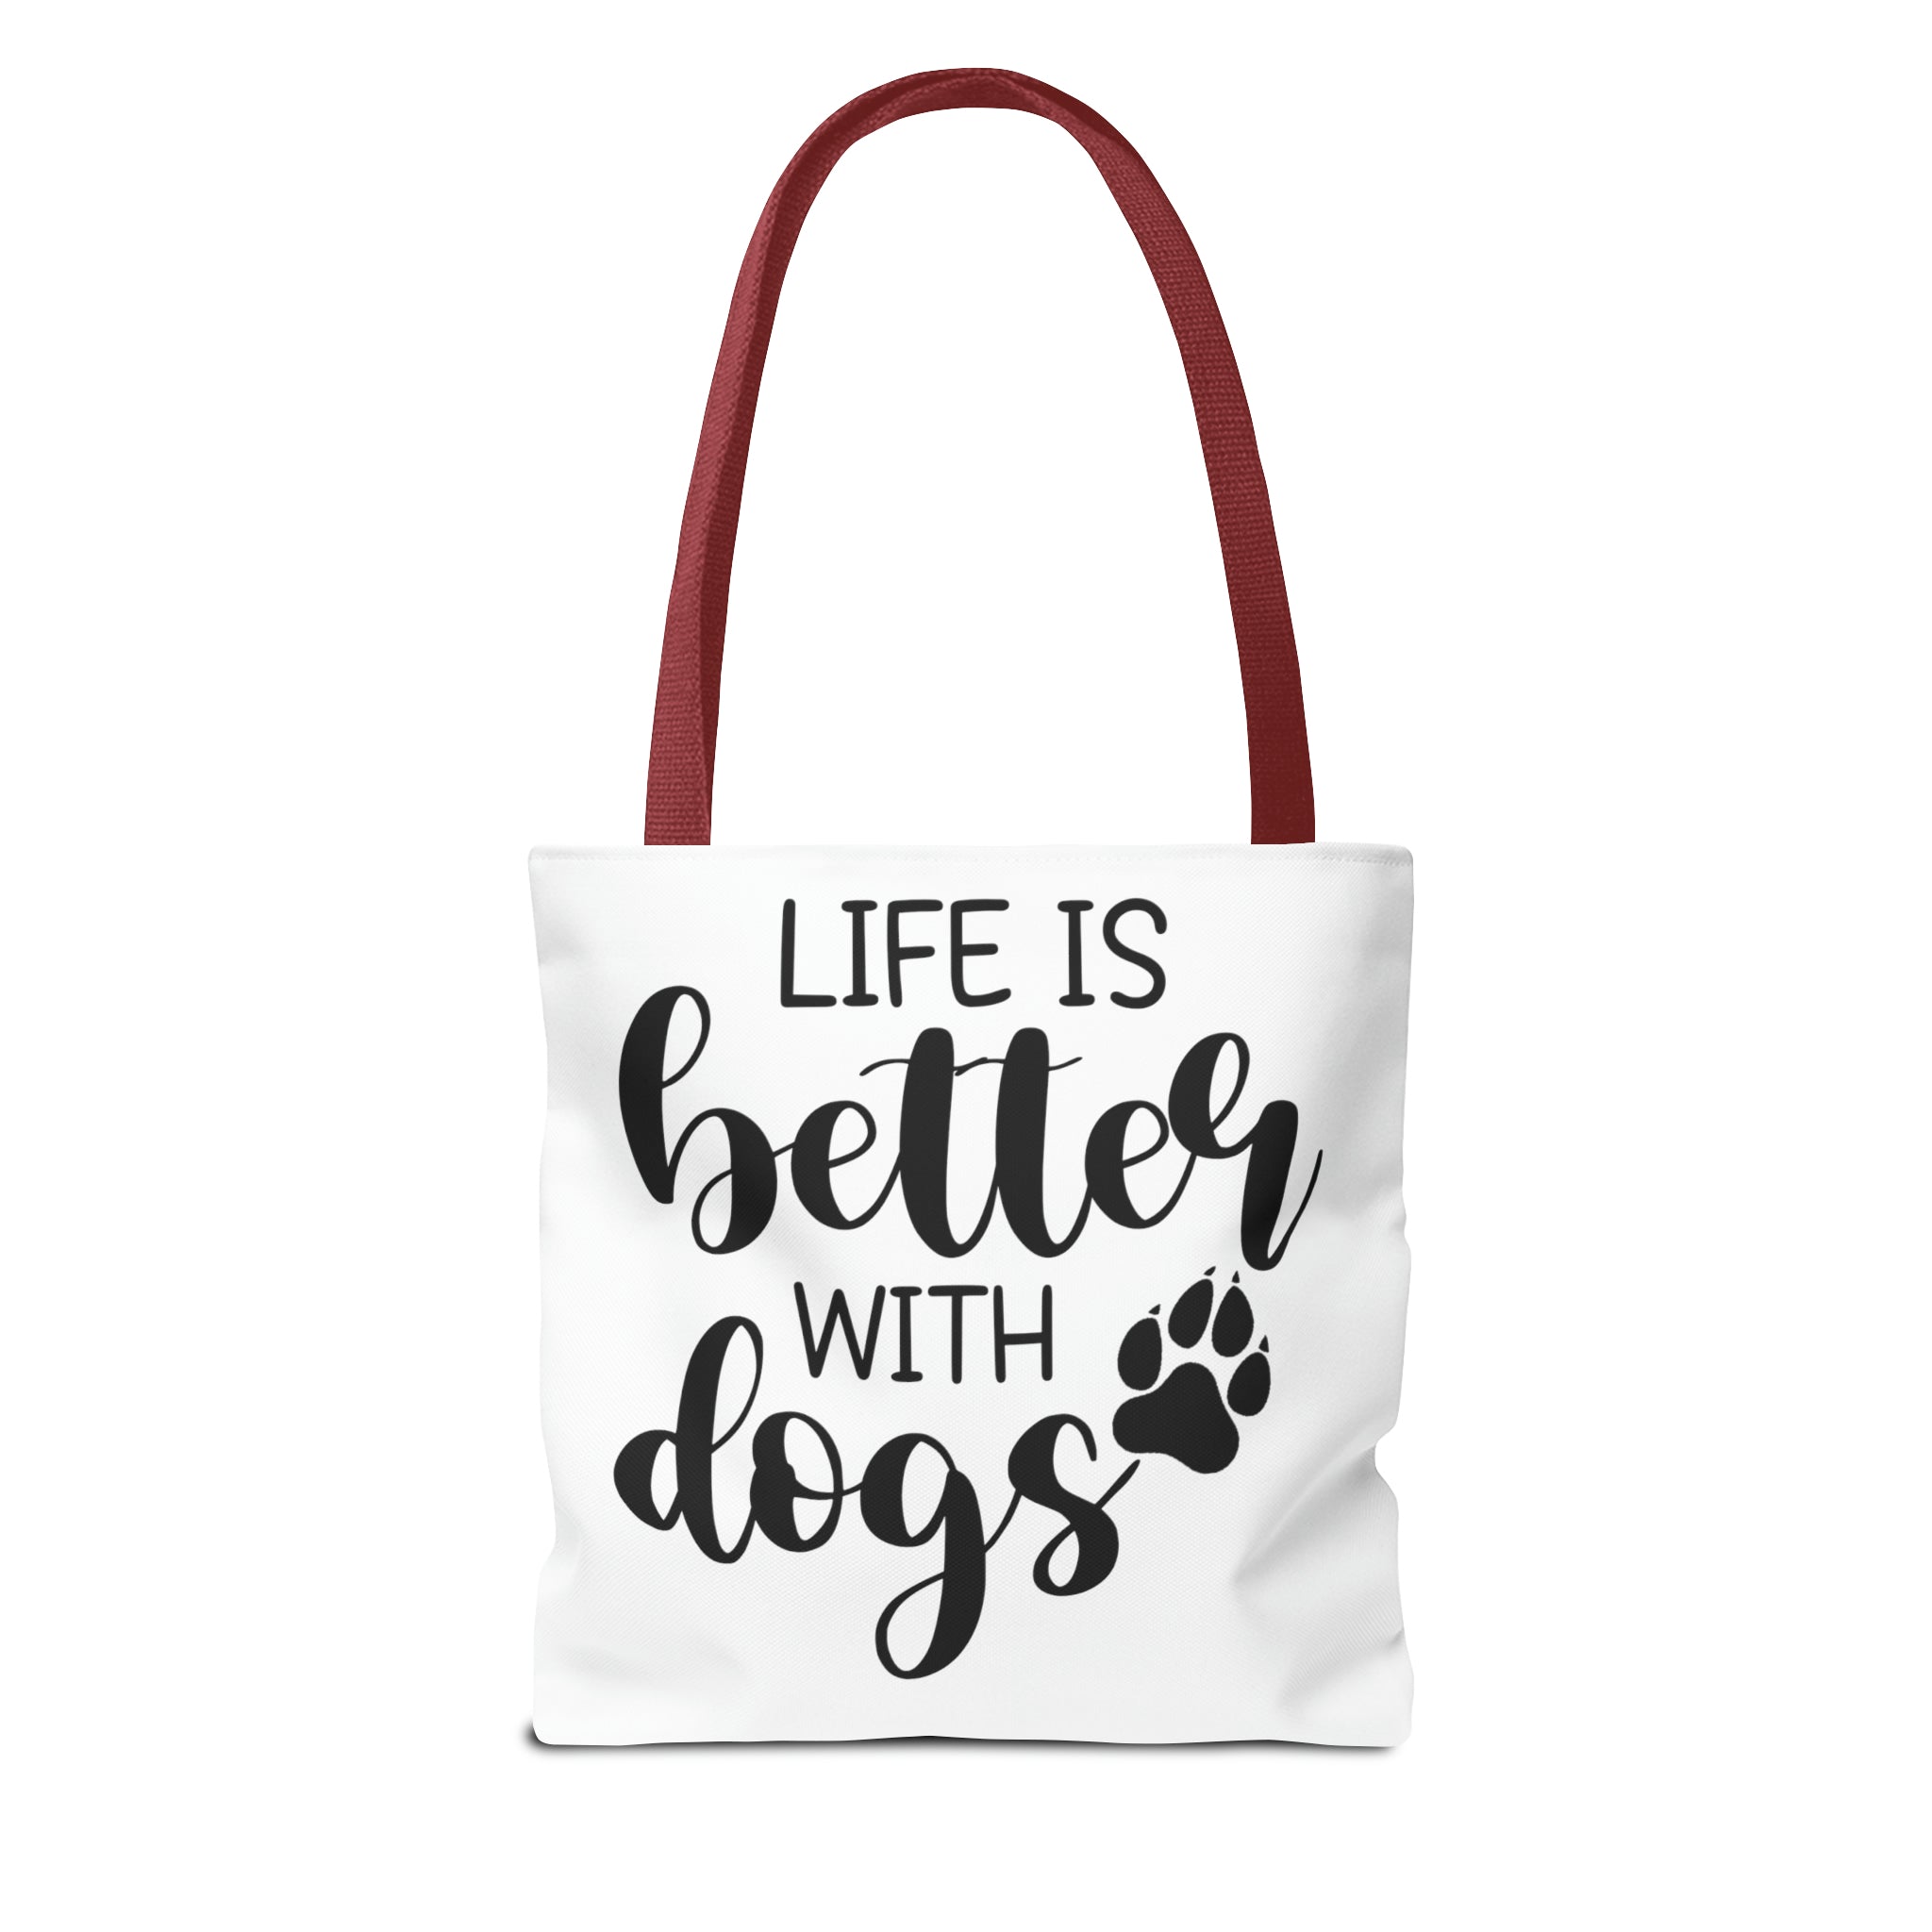 Life is better with dogs - Tote